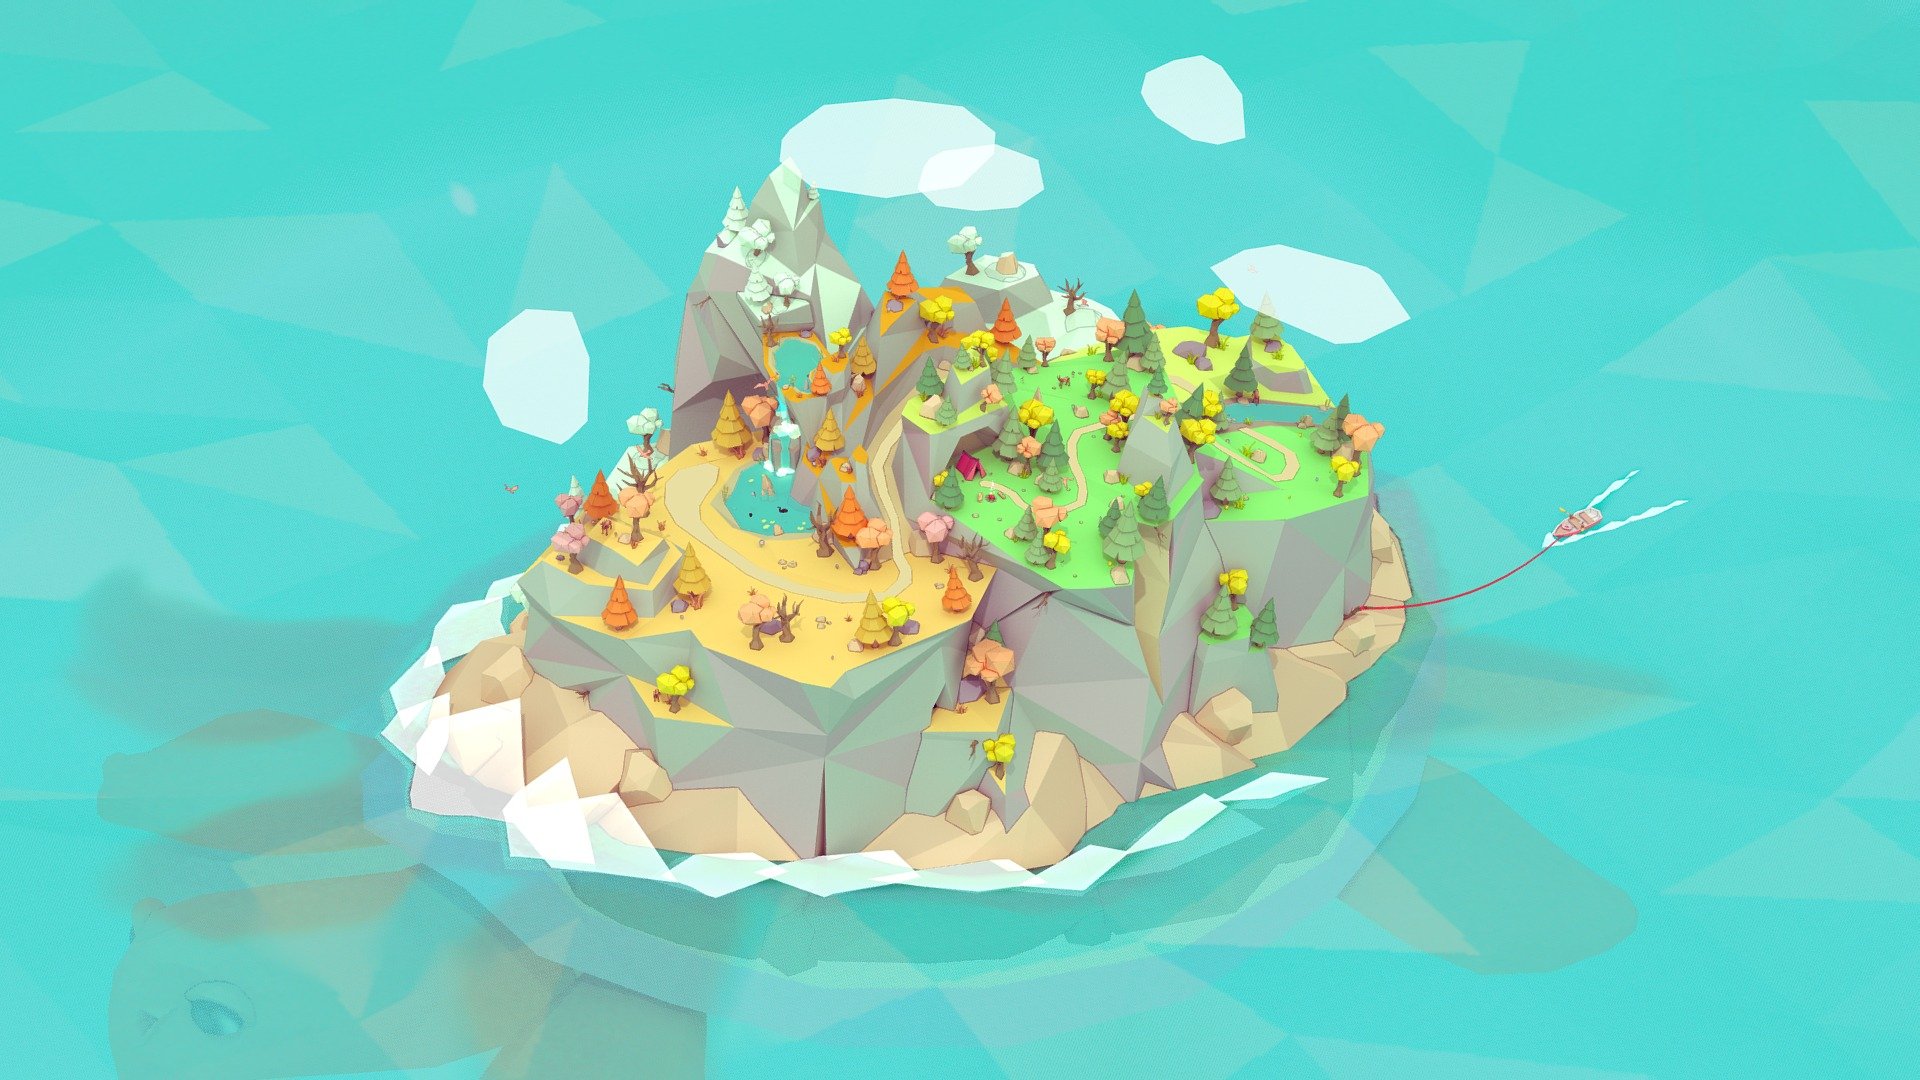 Hi! This is my entry for the Low Poly Fantasy Island contest. I wanted to use solid colors to get the low poly look, so there are almost no textures.

I hope you like!

Made in Blender 2.9 - The Wandering Island - 3D model by MarkusProud 3d model